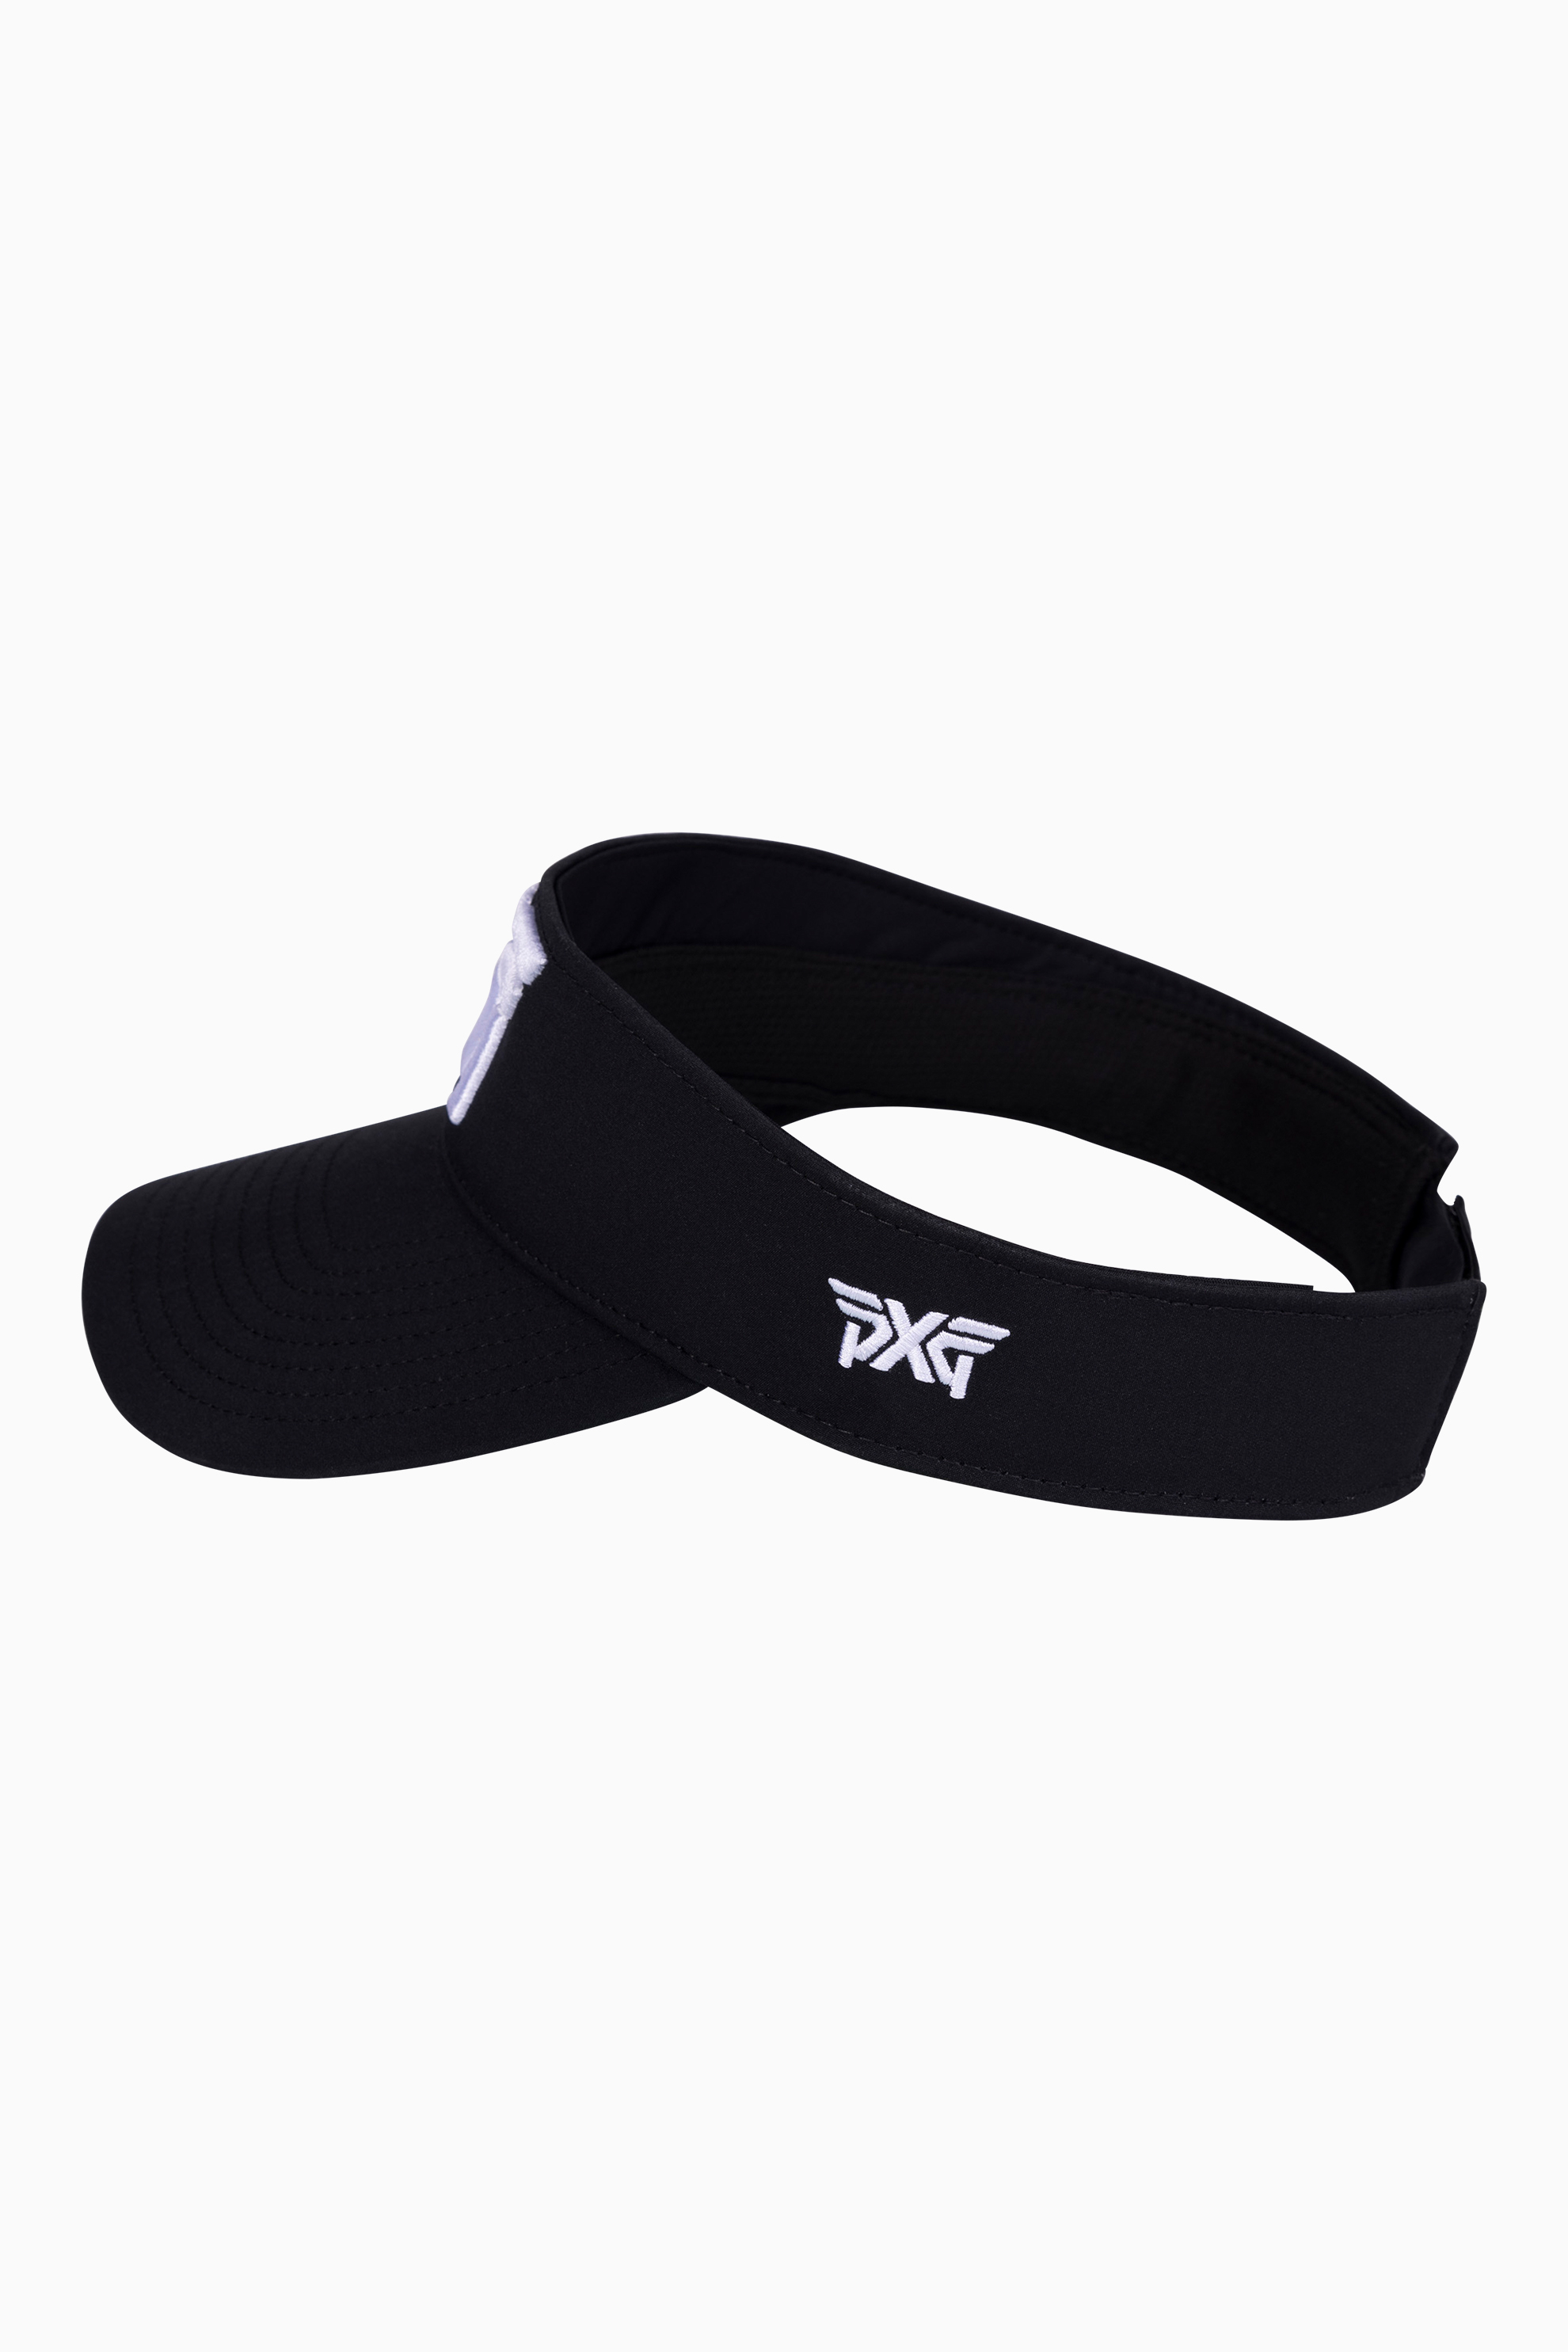 | at Sport Quality Accessories Shop Highest Apparel, the Golf Golf Visor Clubs and Gear, PXG